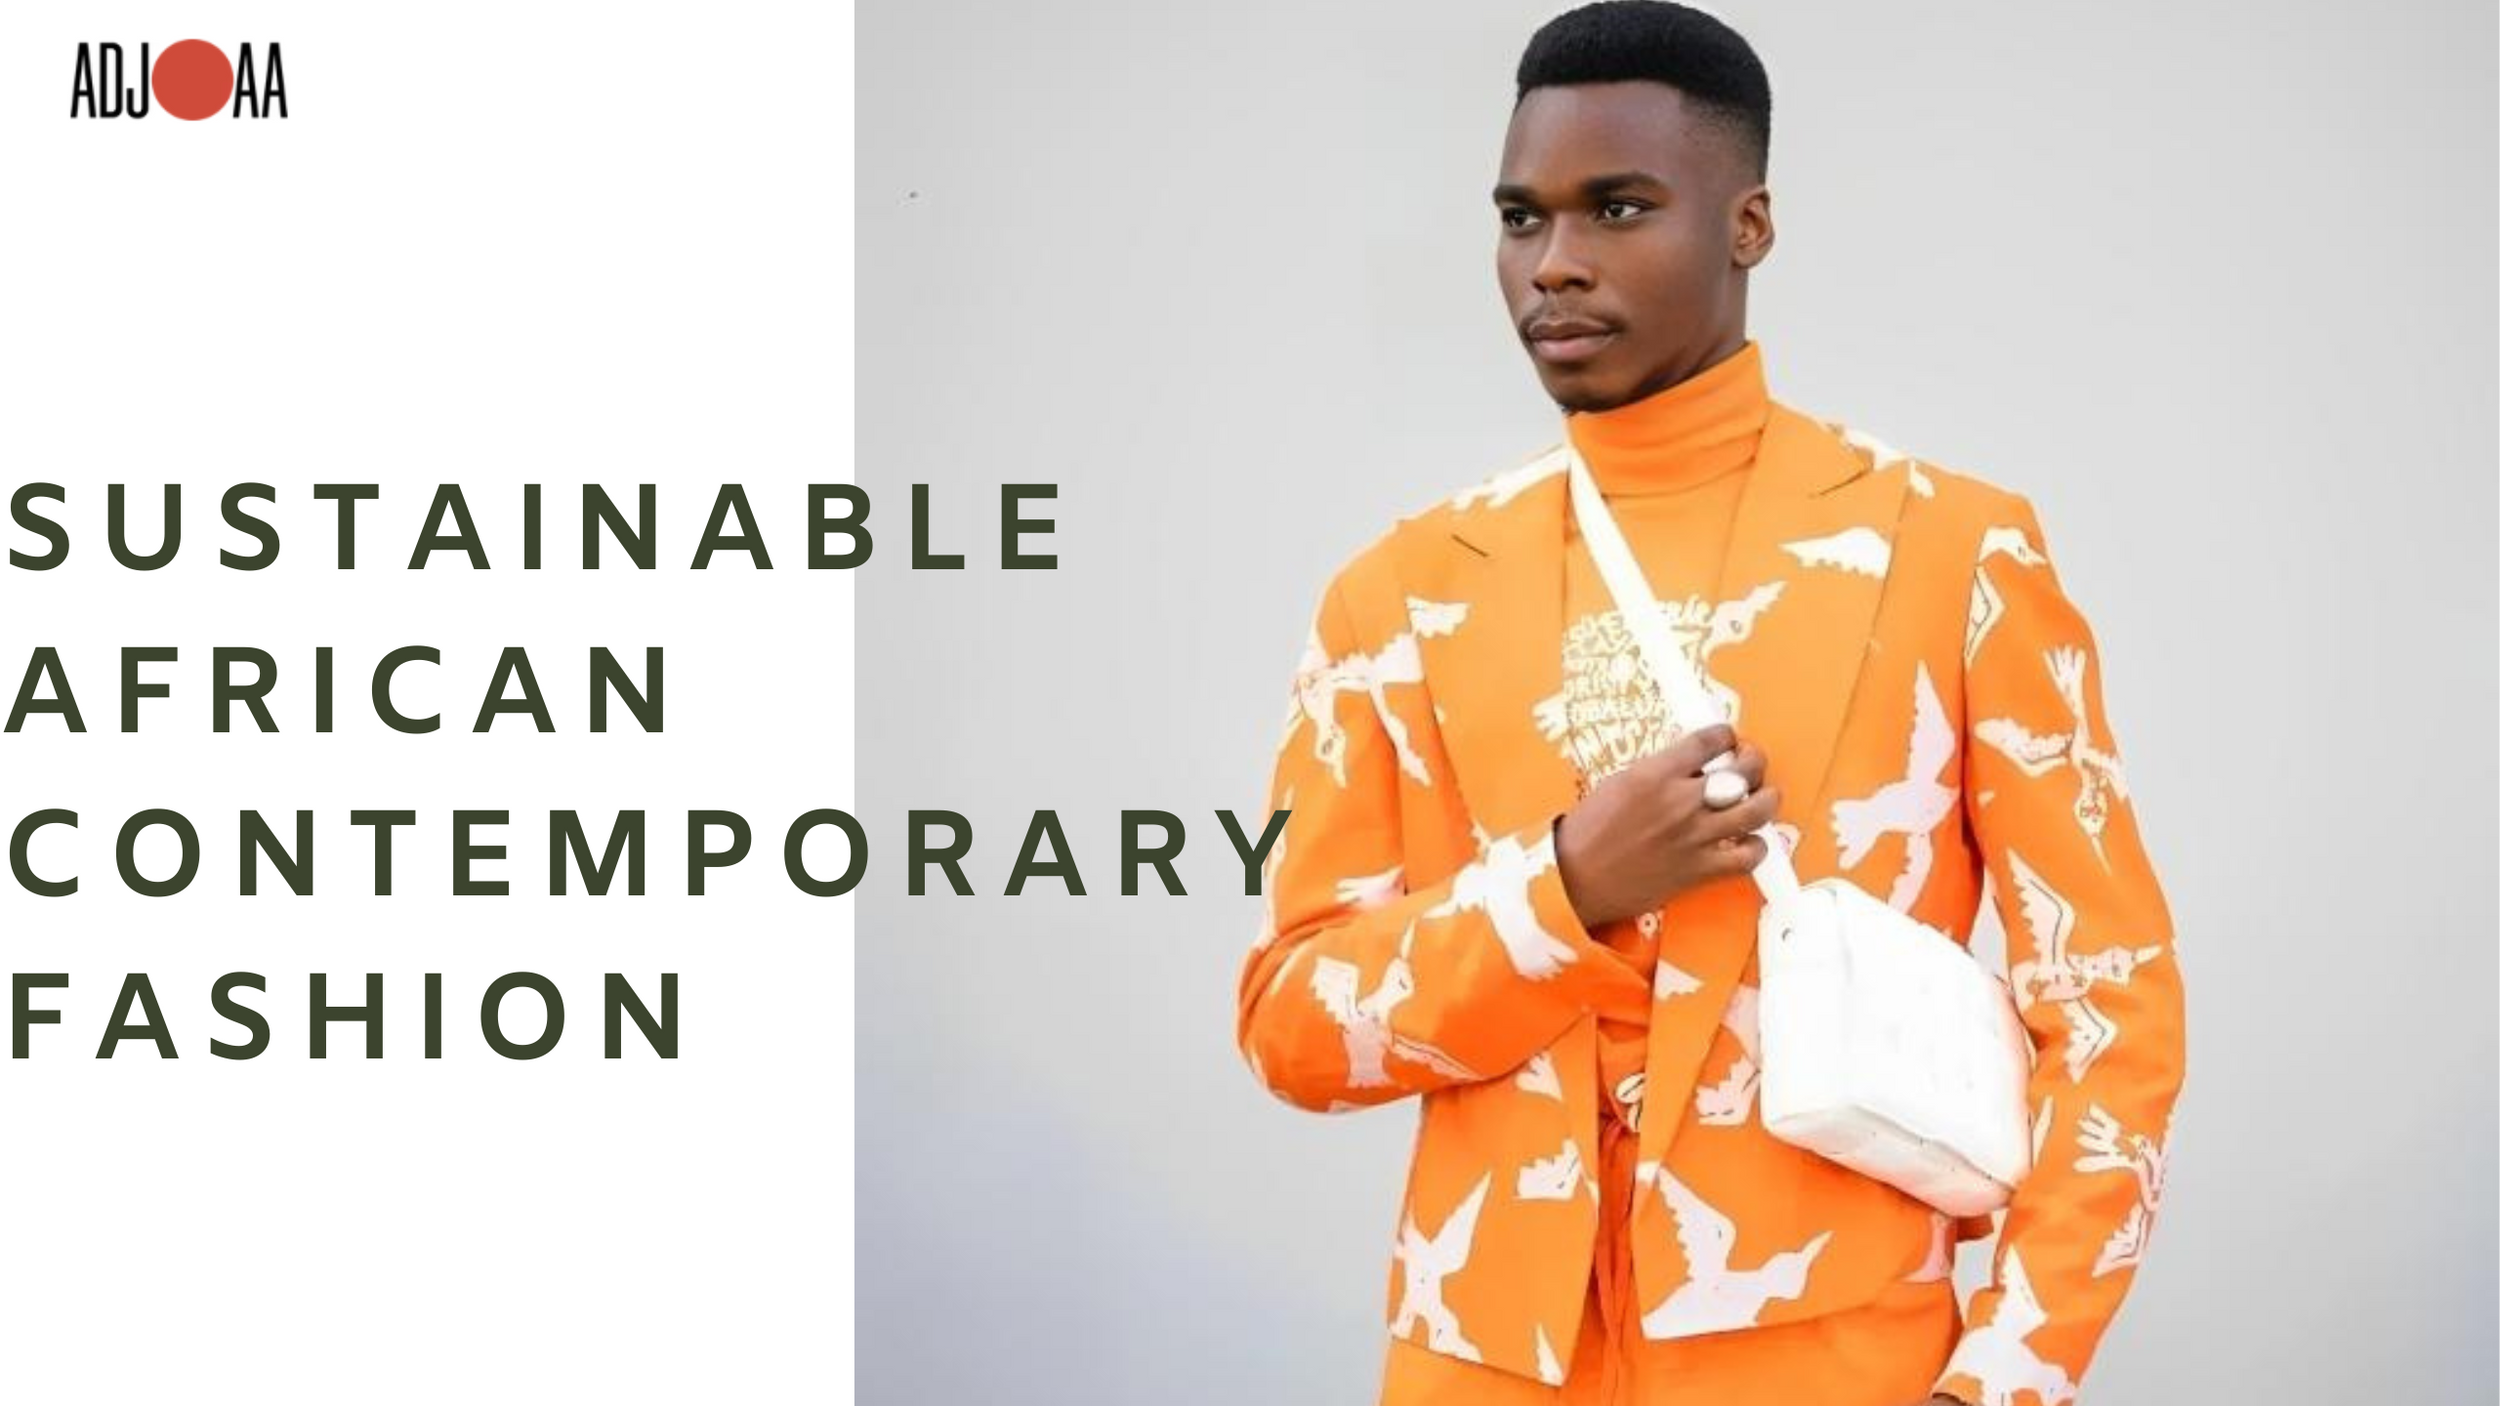 Why is Sustainable Fashion Getting Popular in Africa?